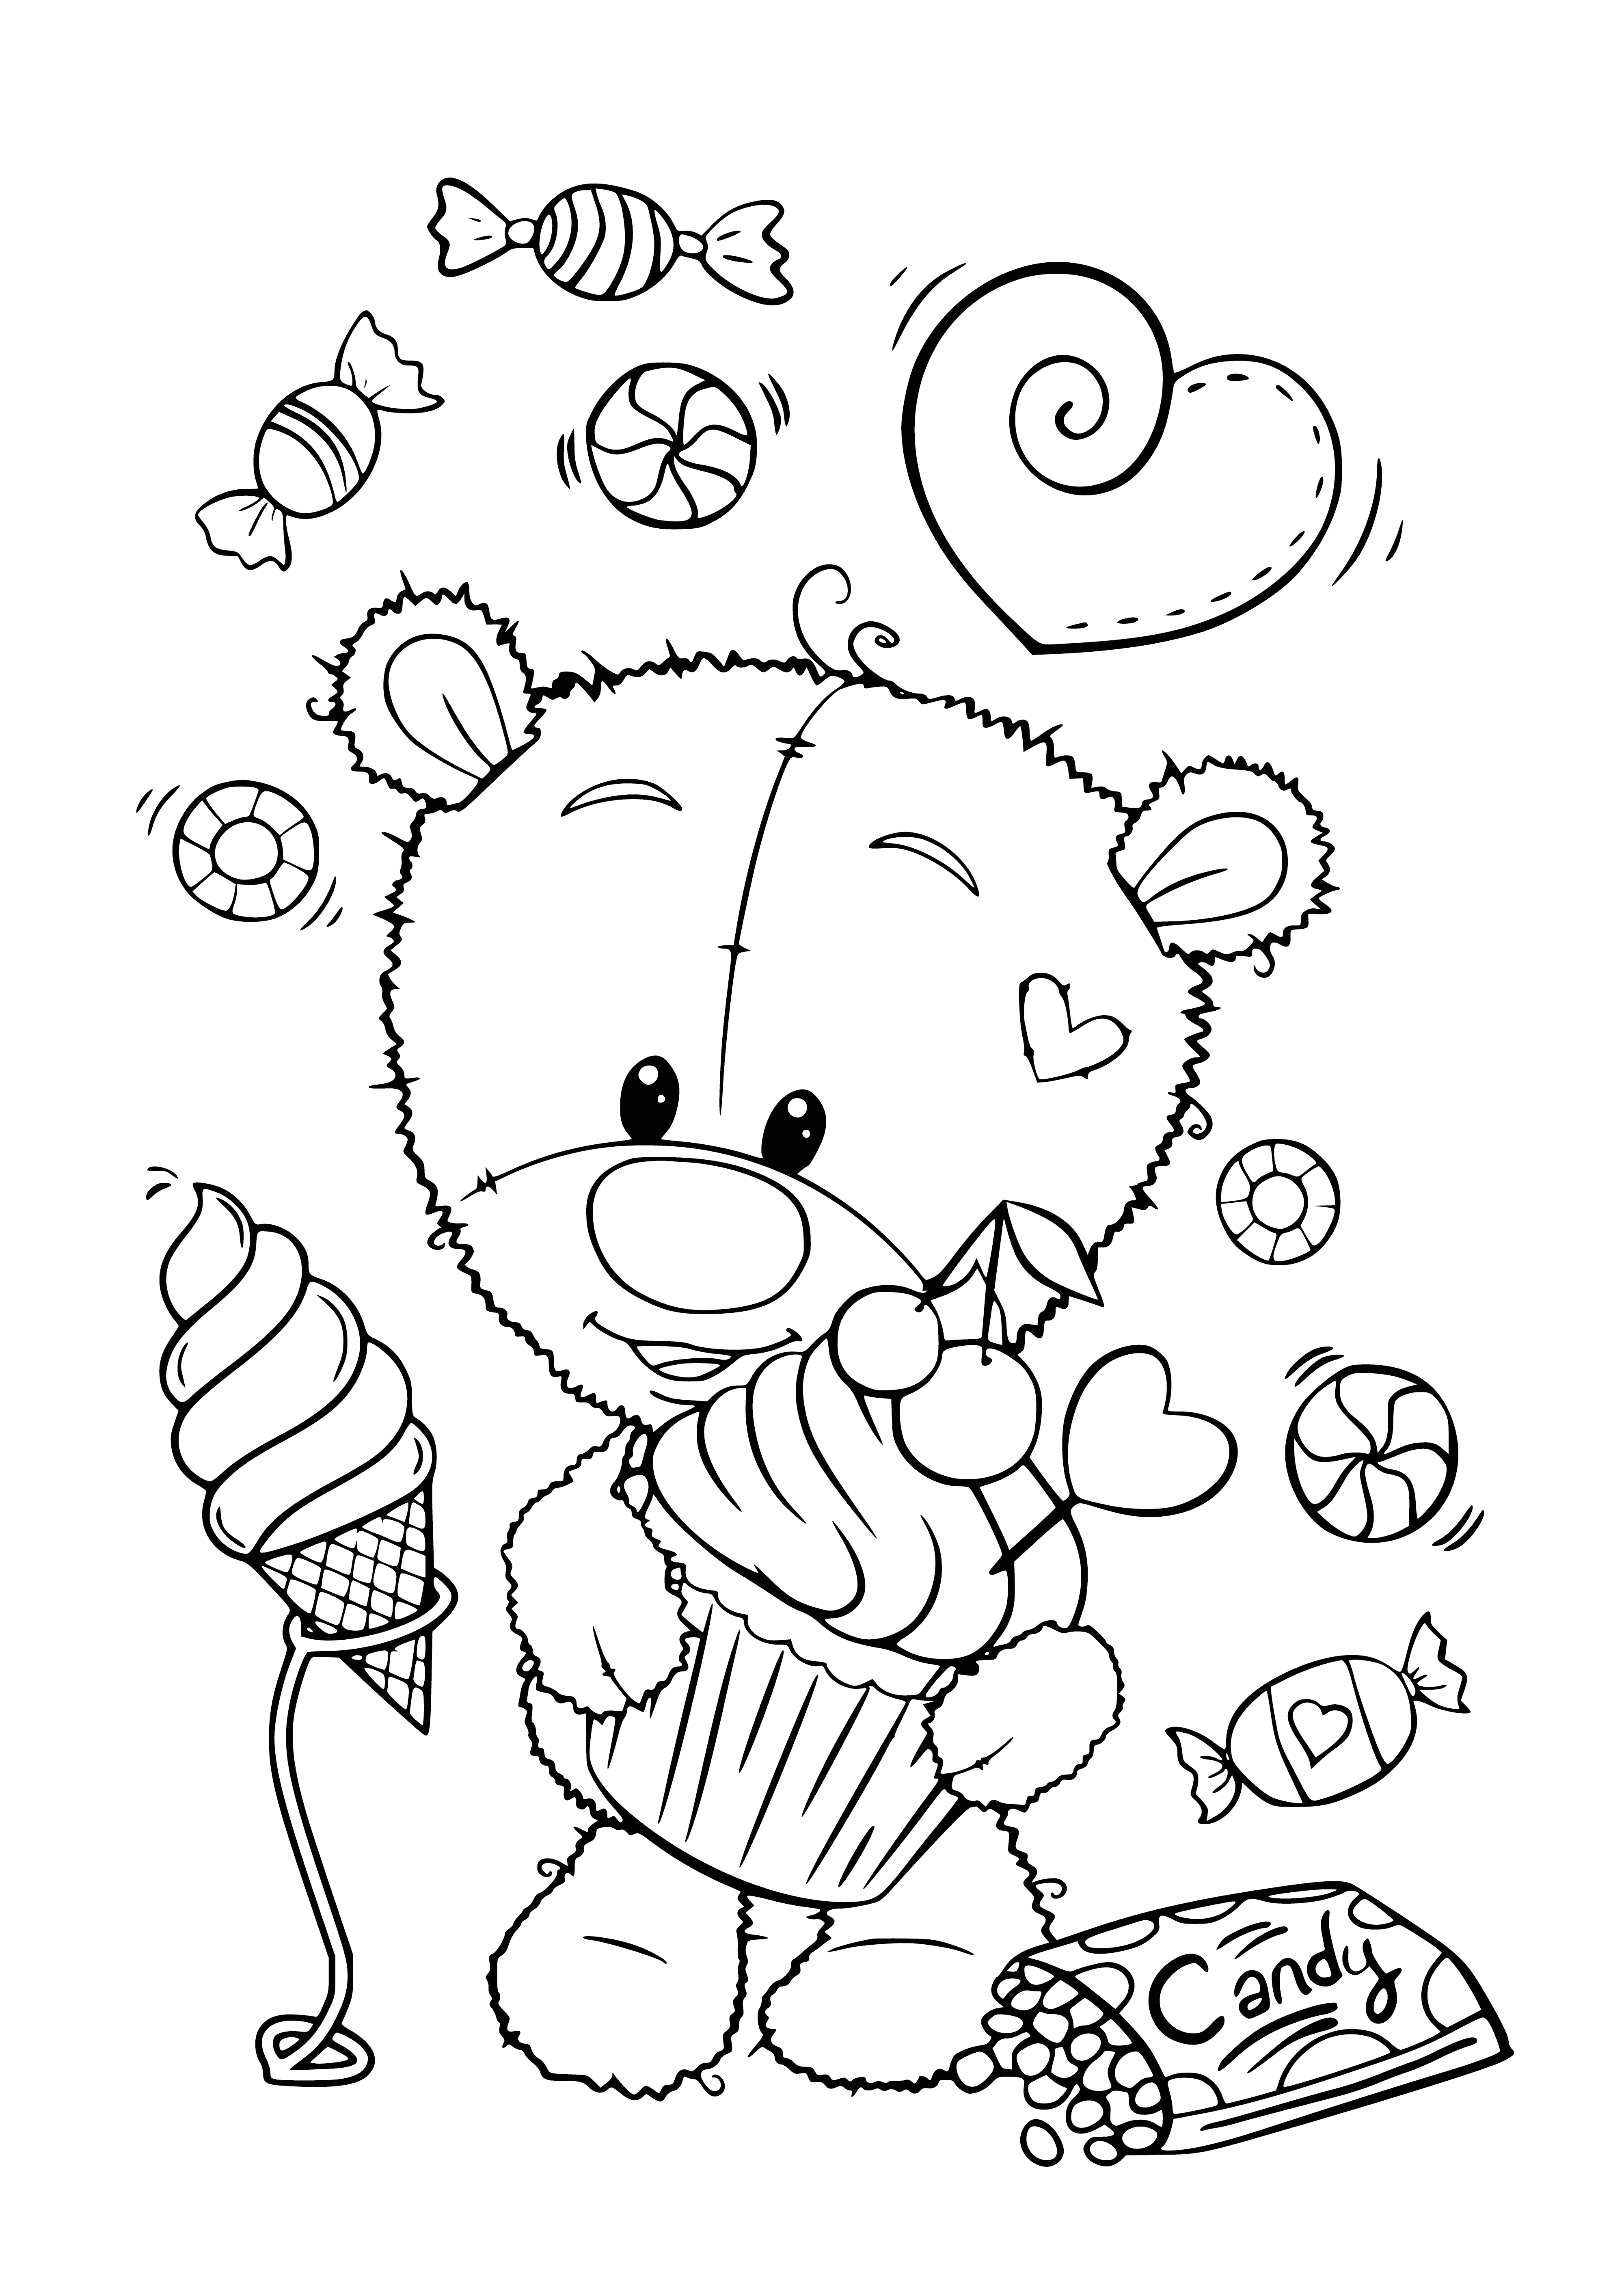 coloring page: A precious teddy bear surrounded by hearts, perfect for anyone who loves kawaii things! #kawaii #teddybear #coloringpage